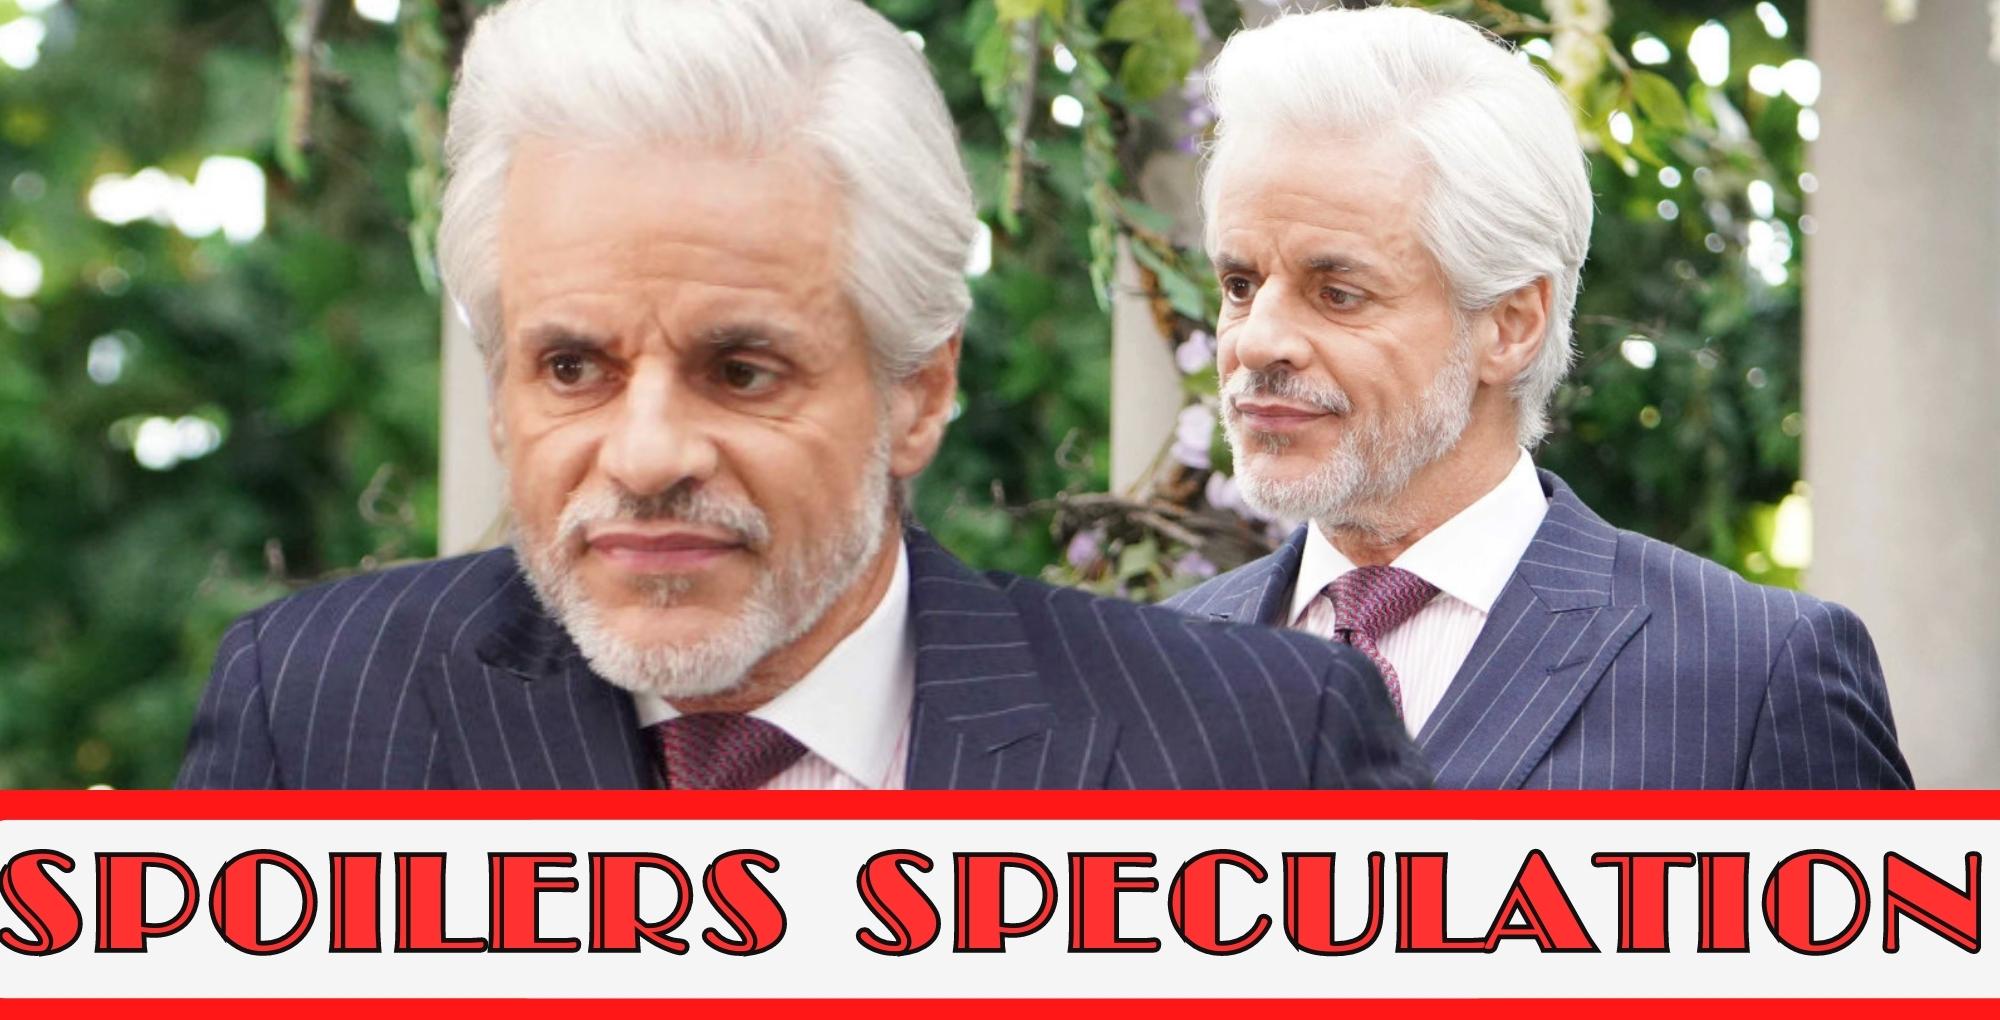 y&r spoilers speculation with two images of michael baldwin.